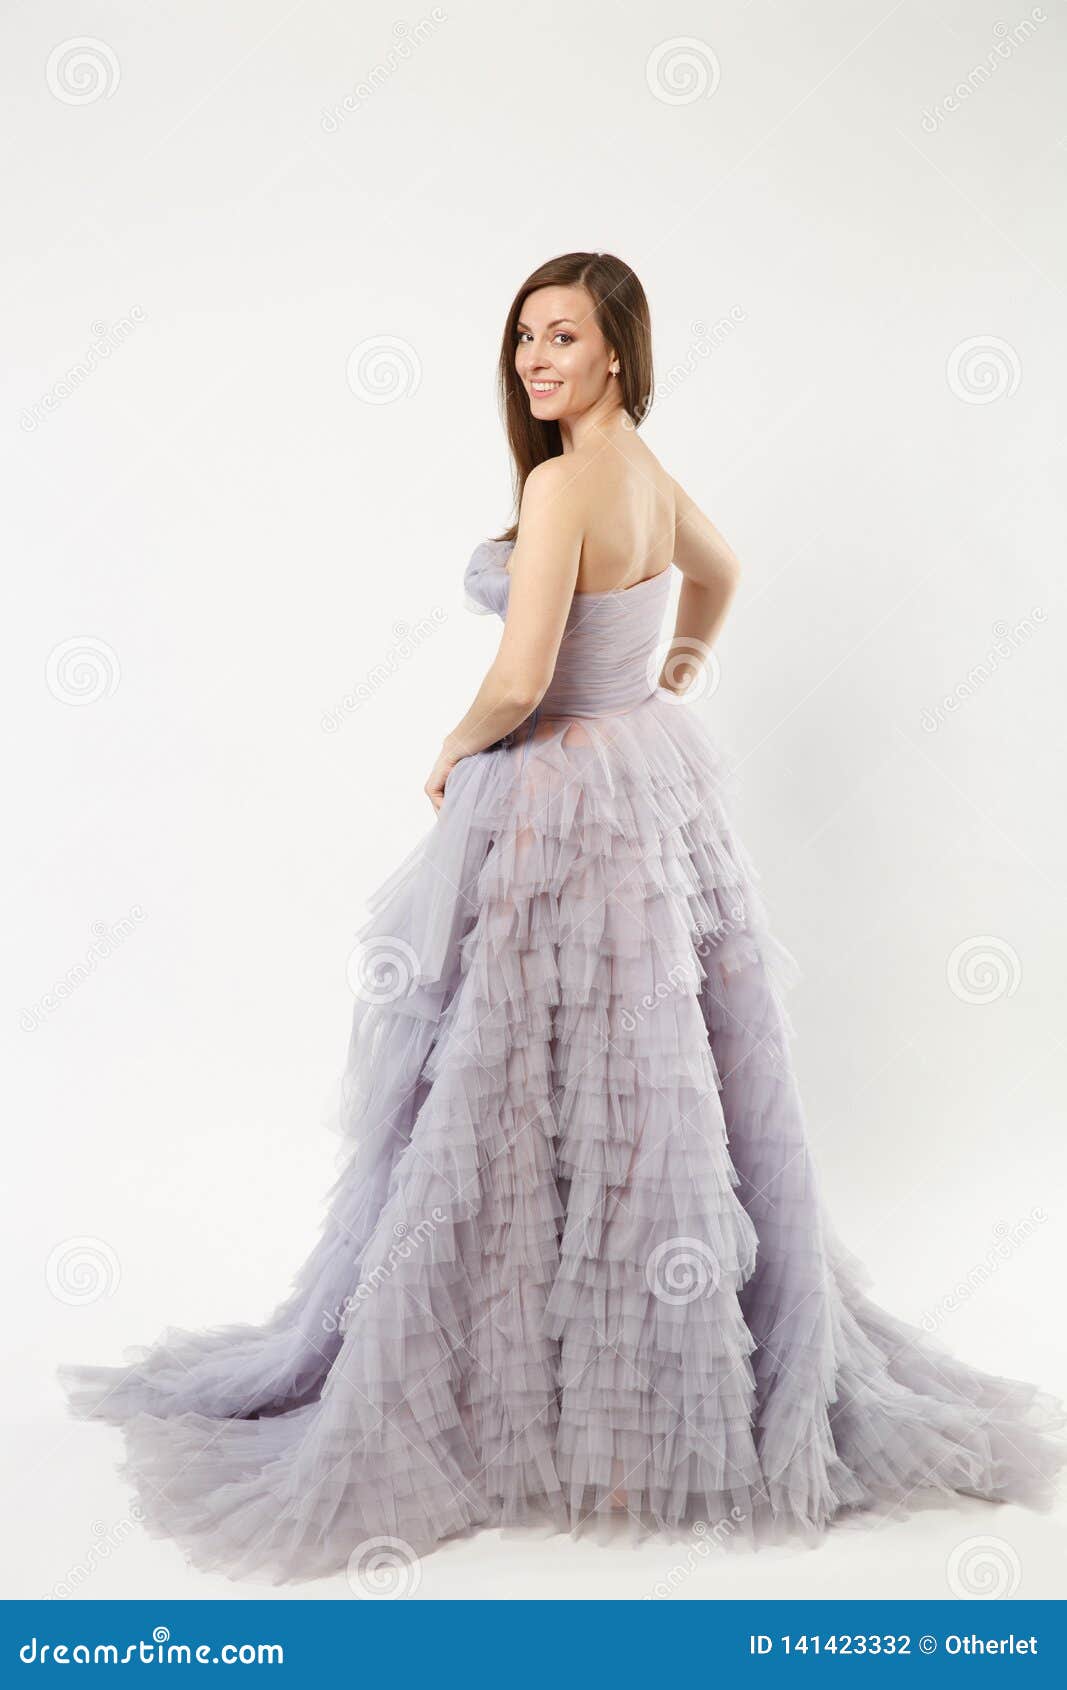 Premium Photo | A young woman in a sleeveless ball gown poses against an  isolated background a beautiful brunette wi...